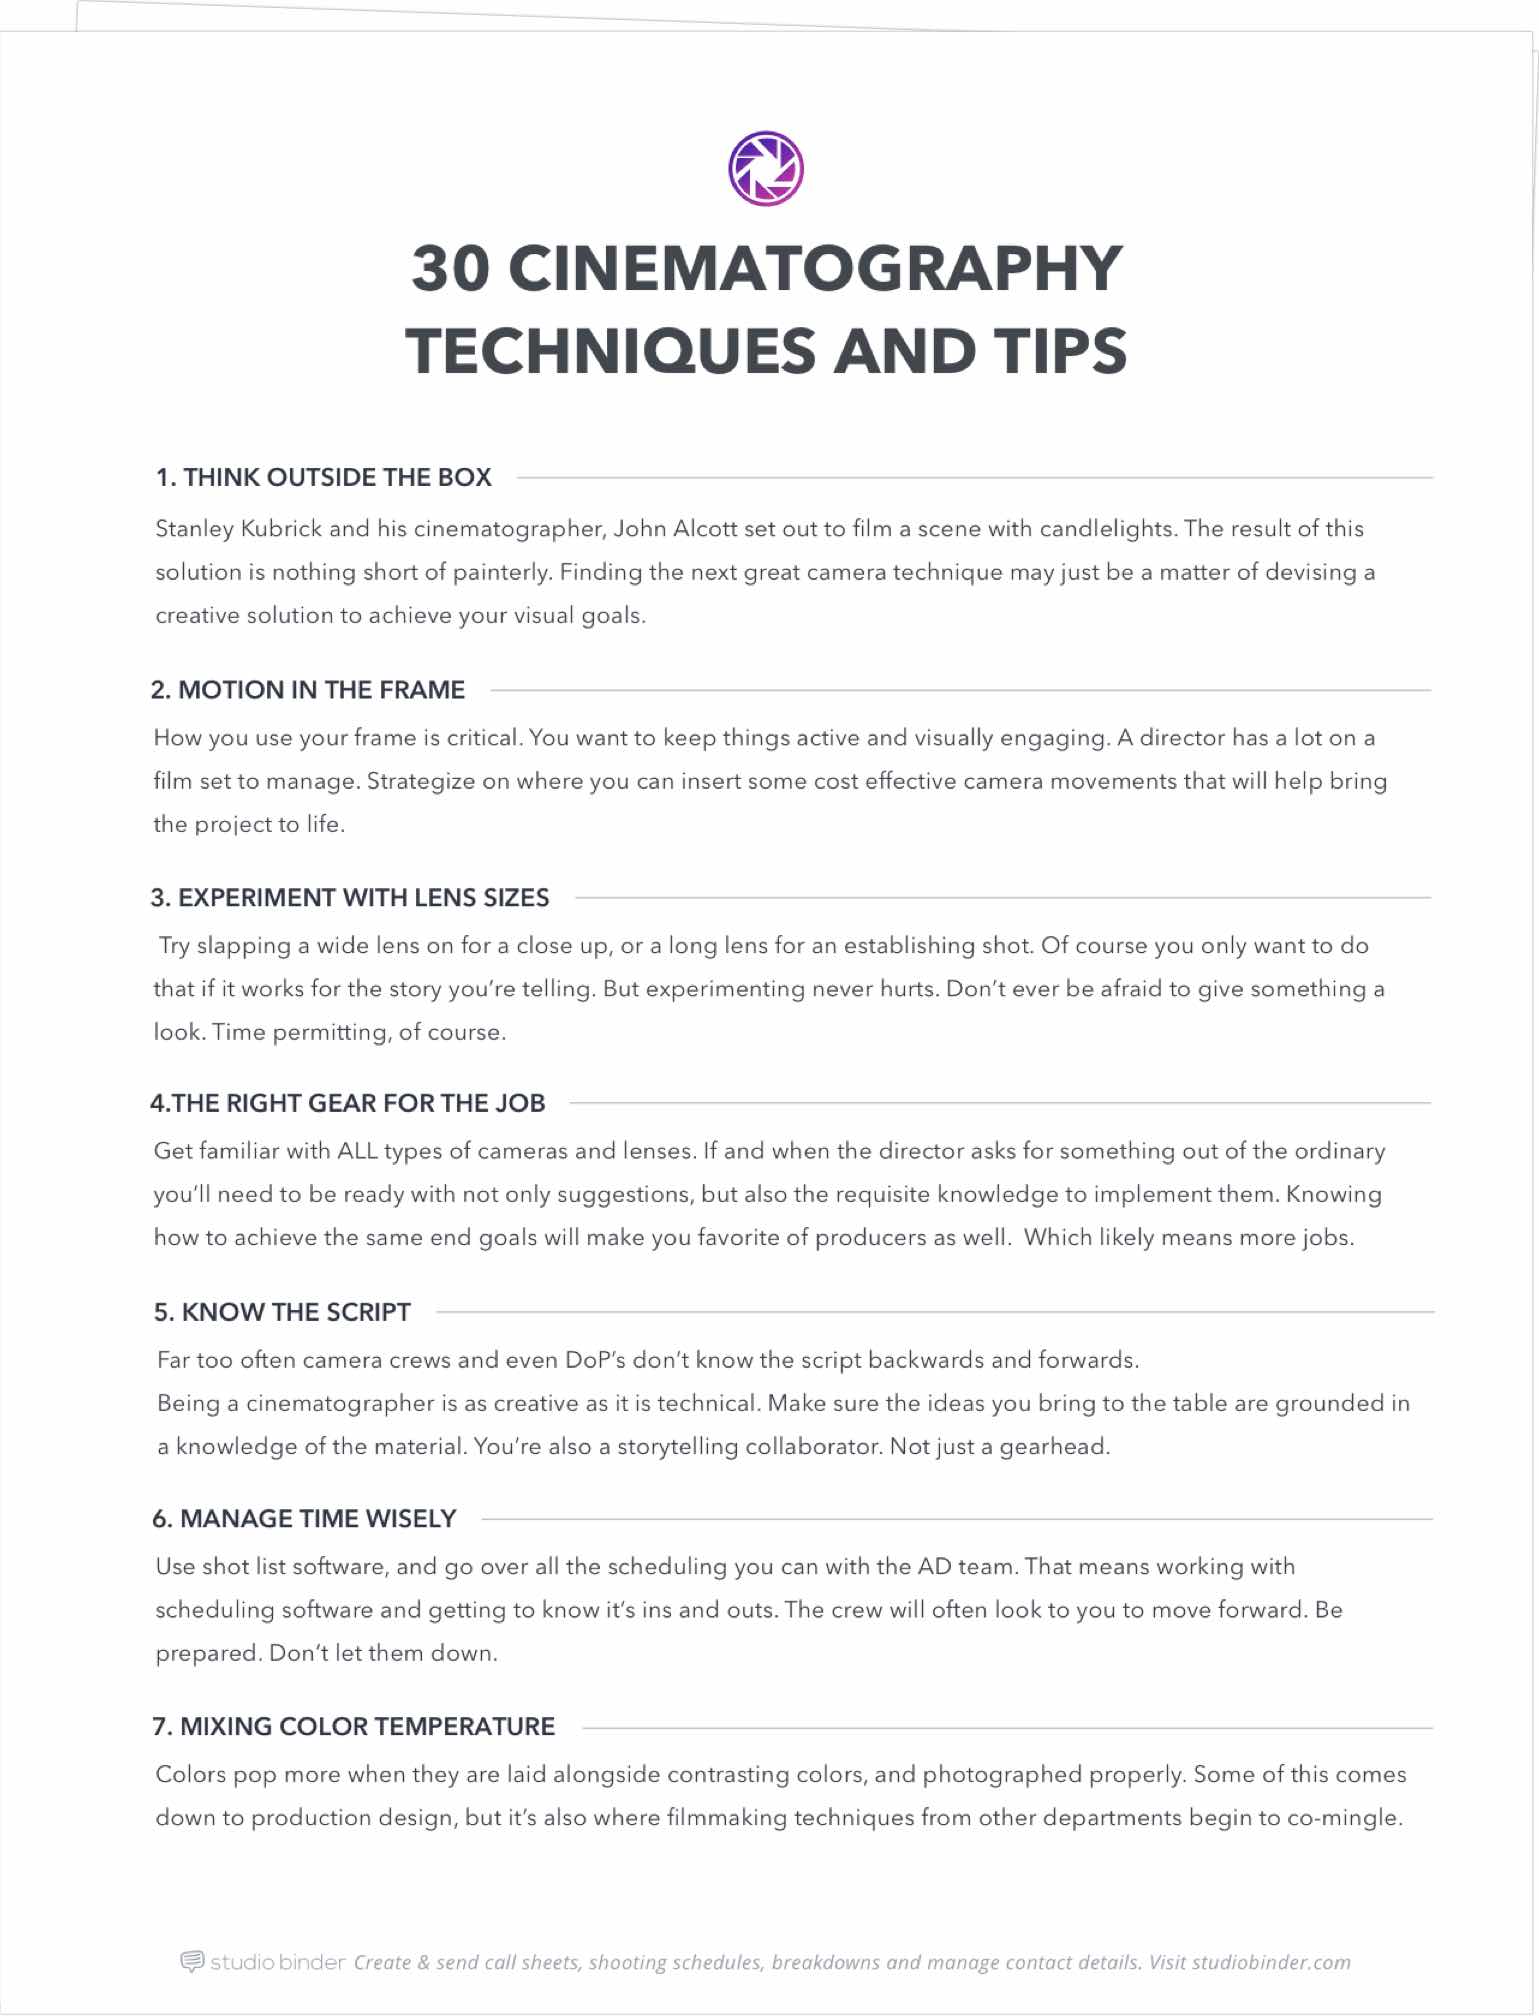 30 Cinematography Techniques and TIps - Exit Intent Full - Page - StudioBinder